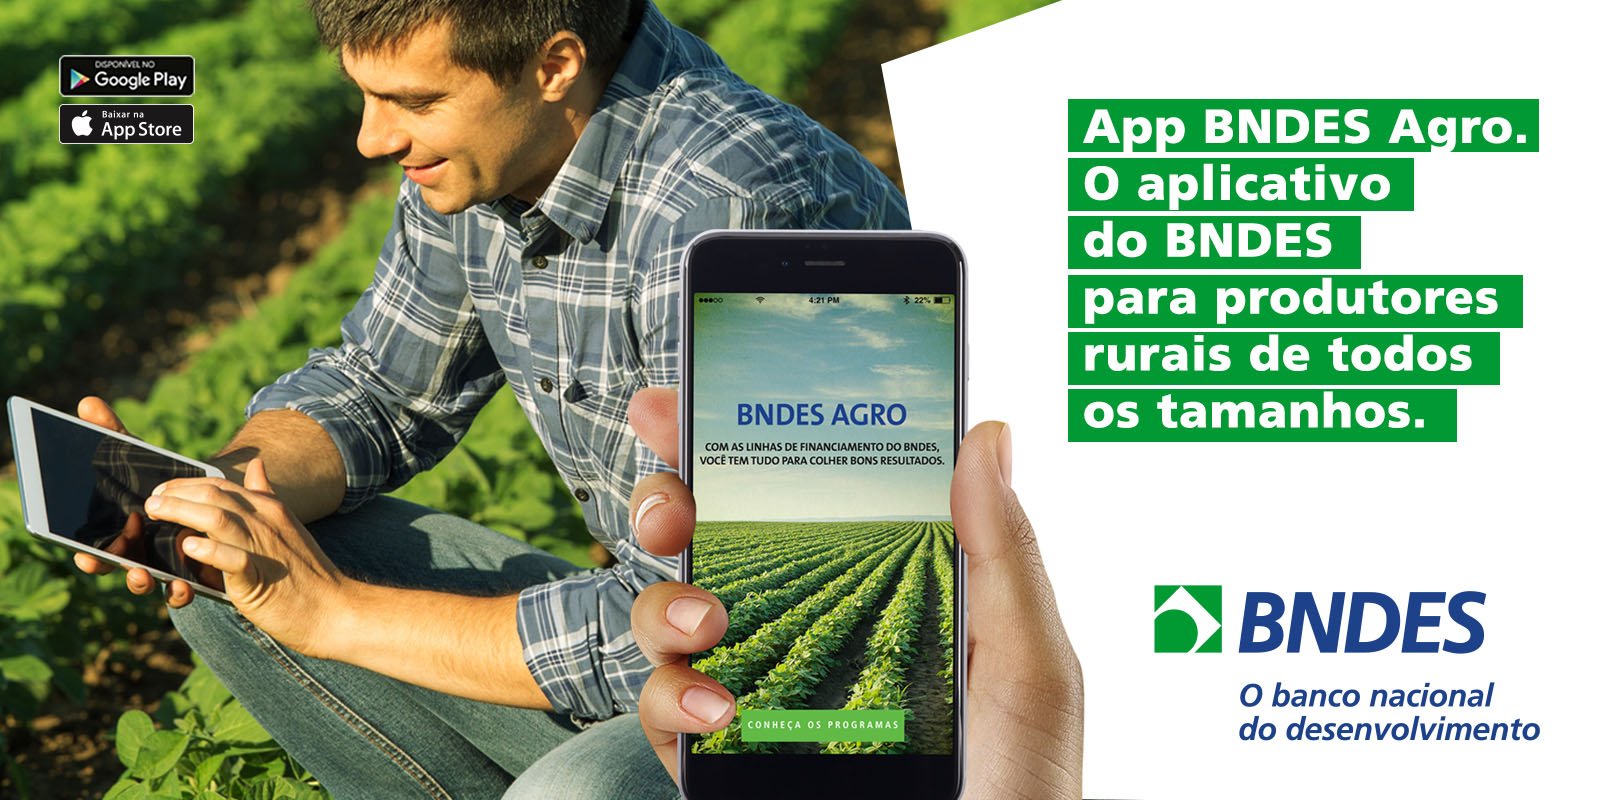 Featured image for “BNDES Agro”